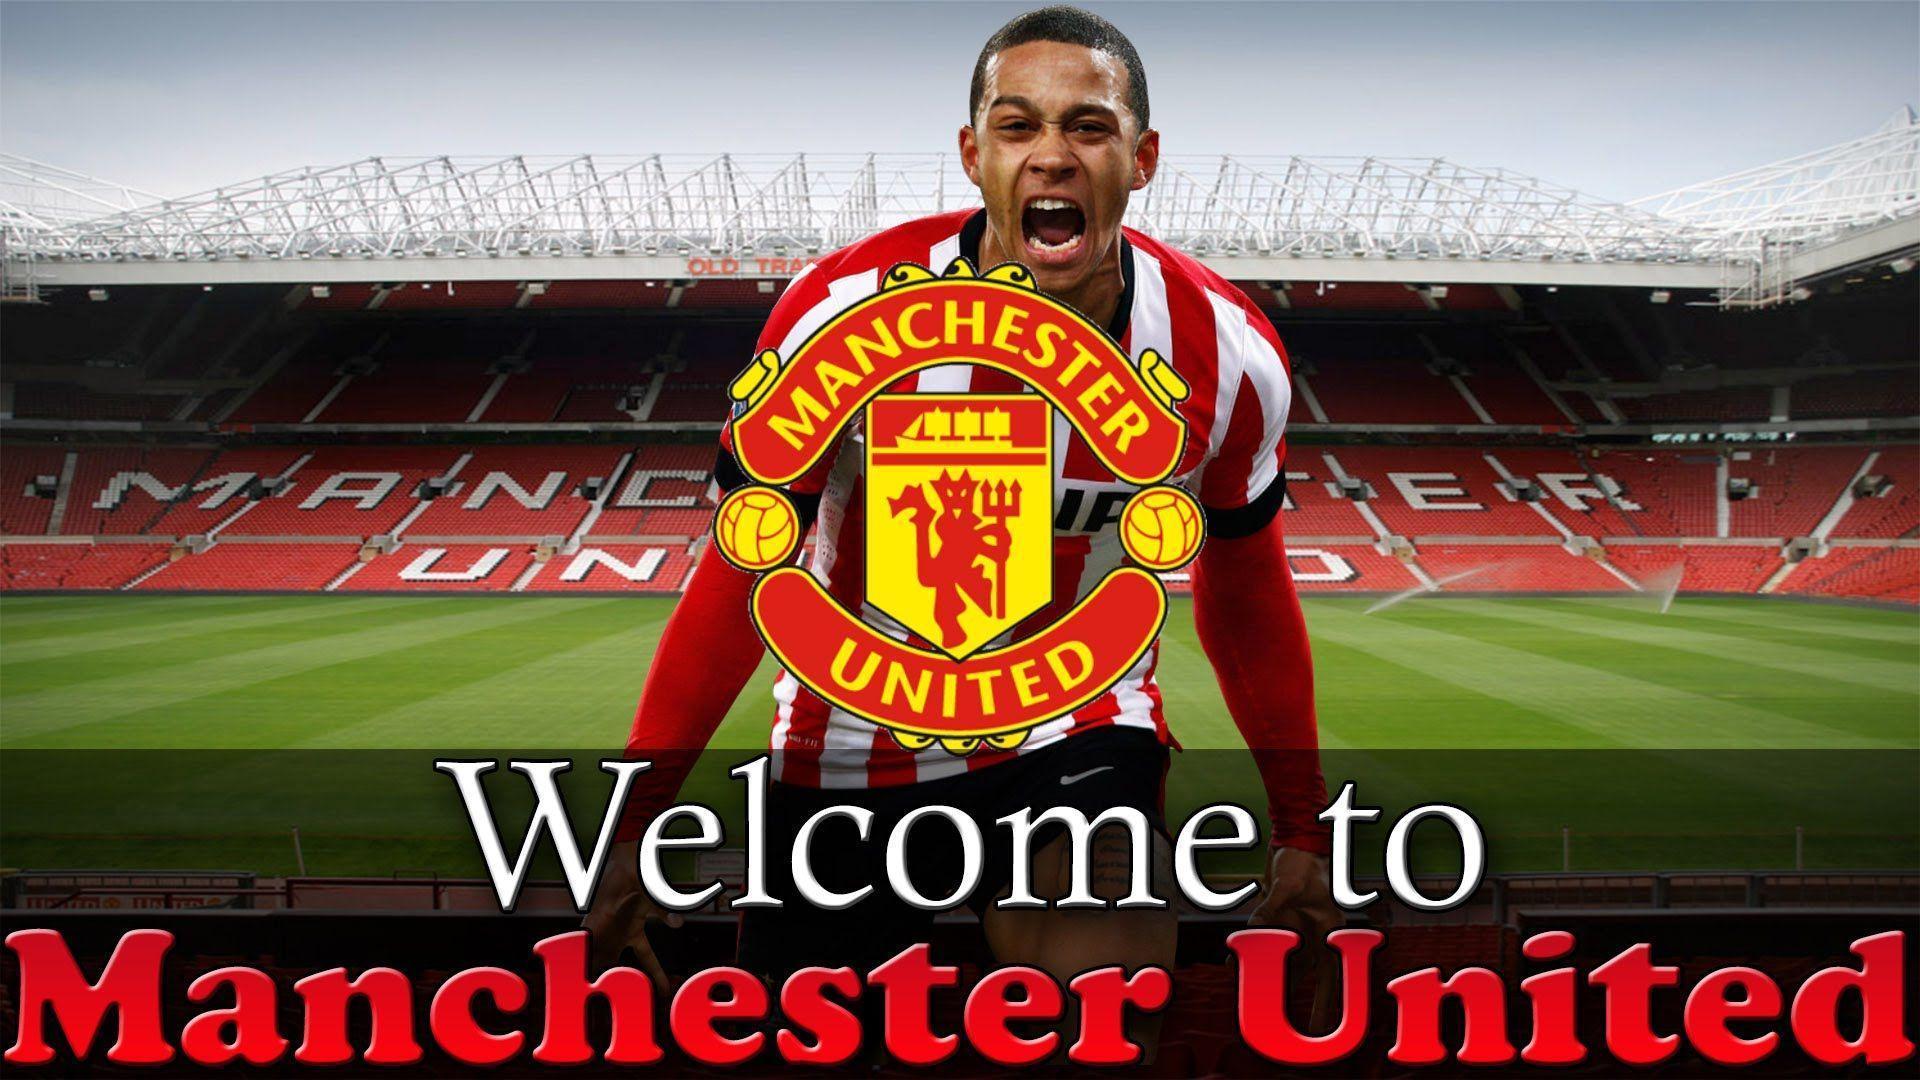 Manchester United have signed Memphis Depay for £22m!